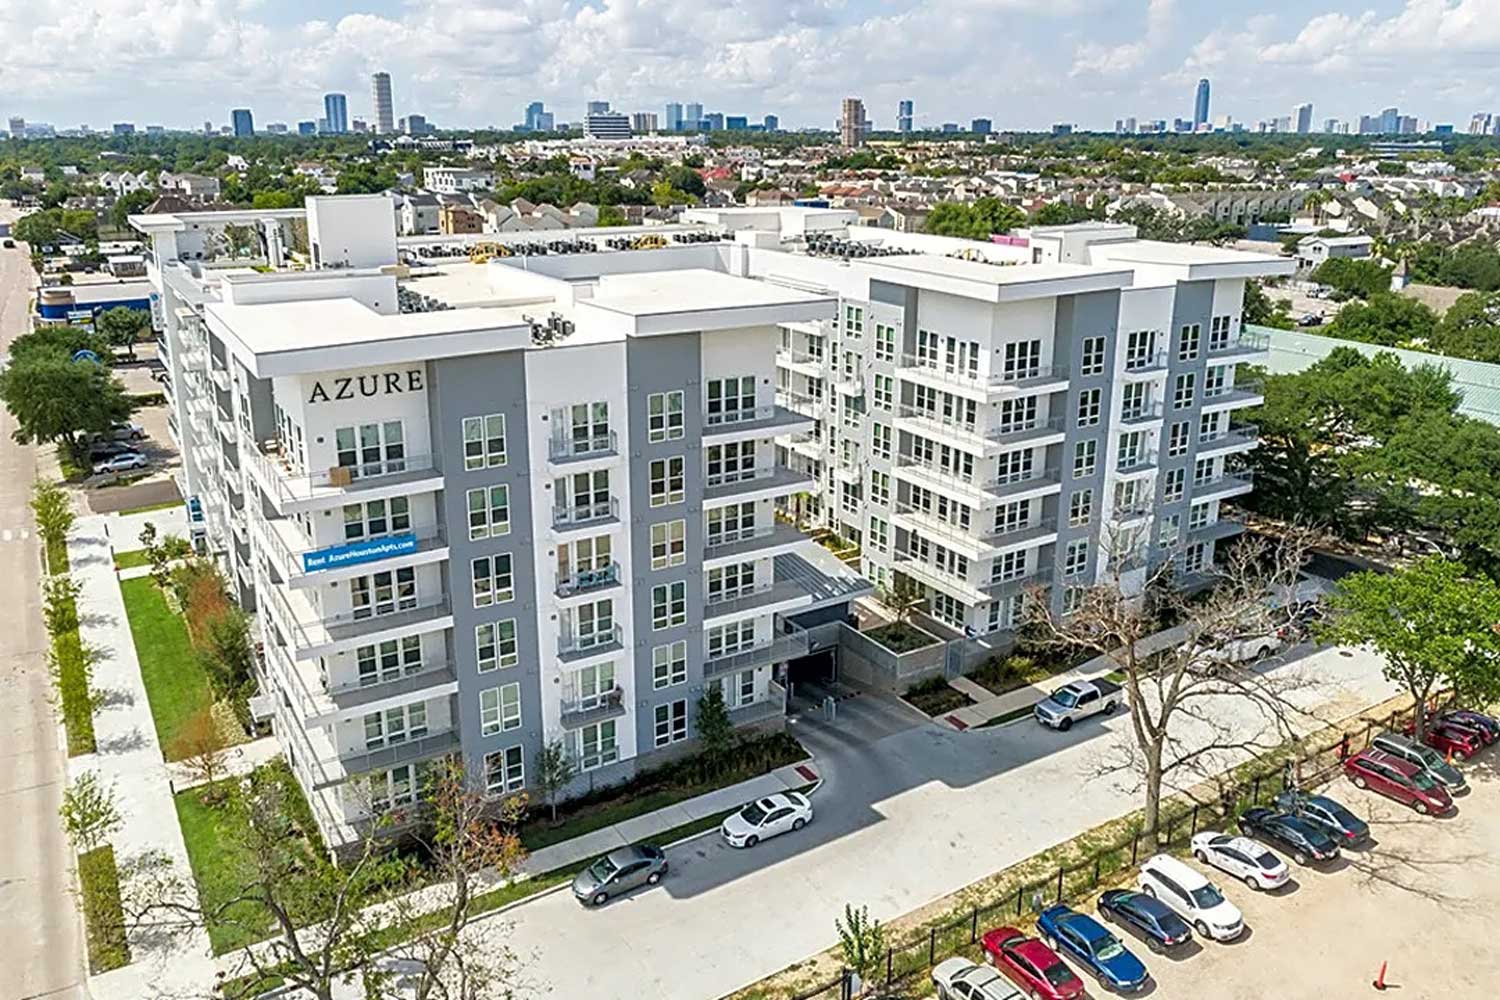 Azure - affordable and essential housing in Houston.